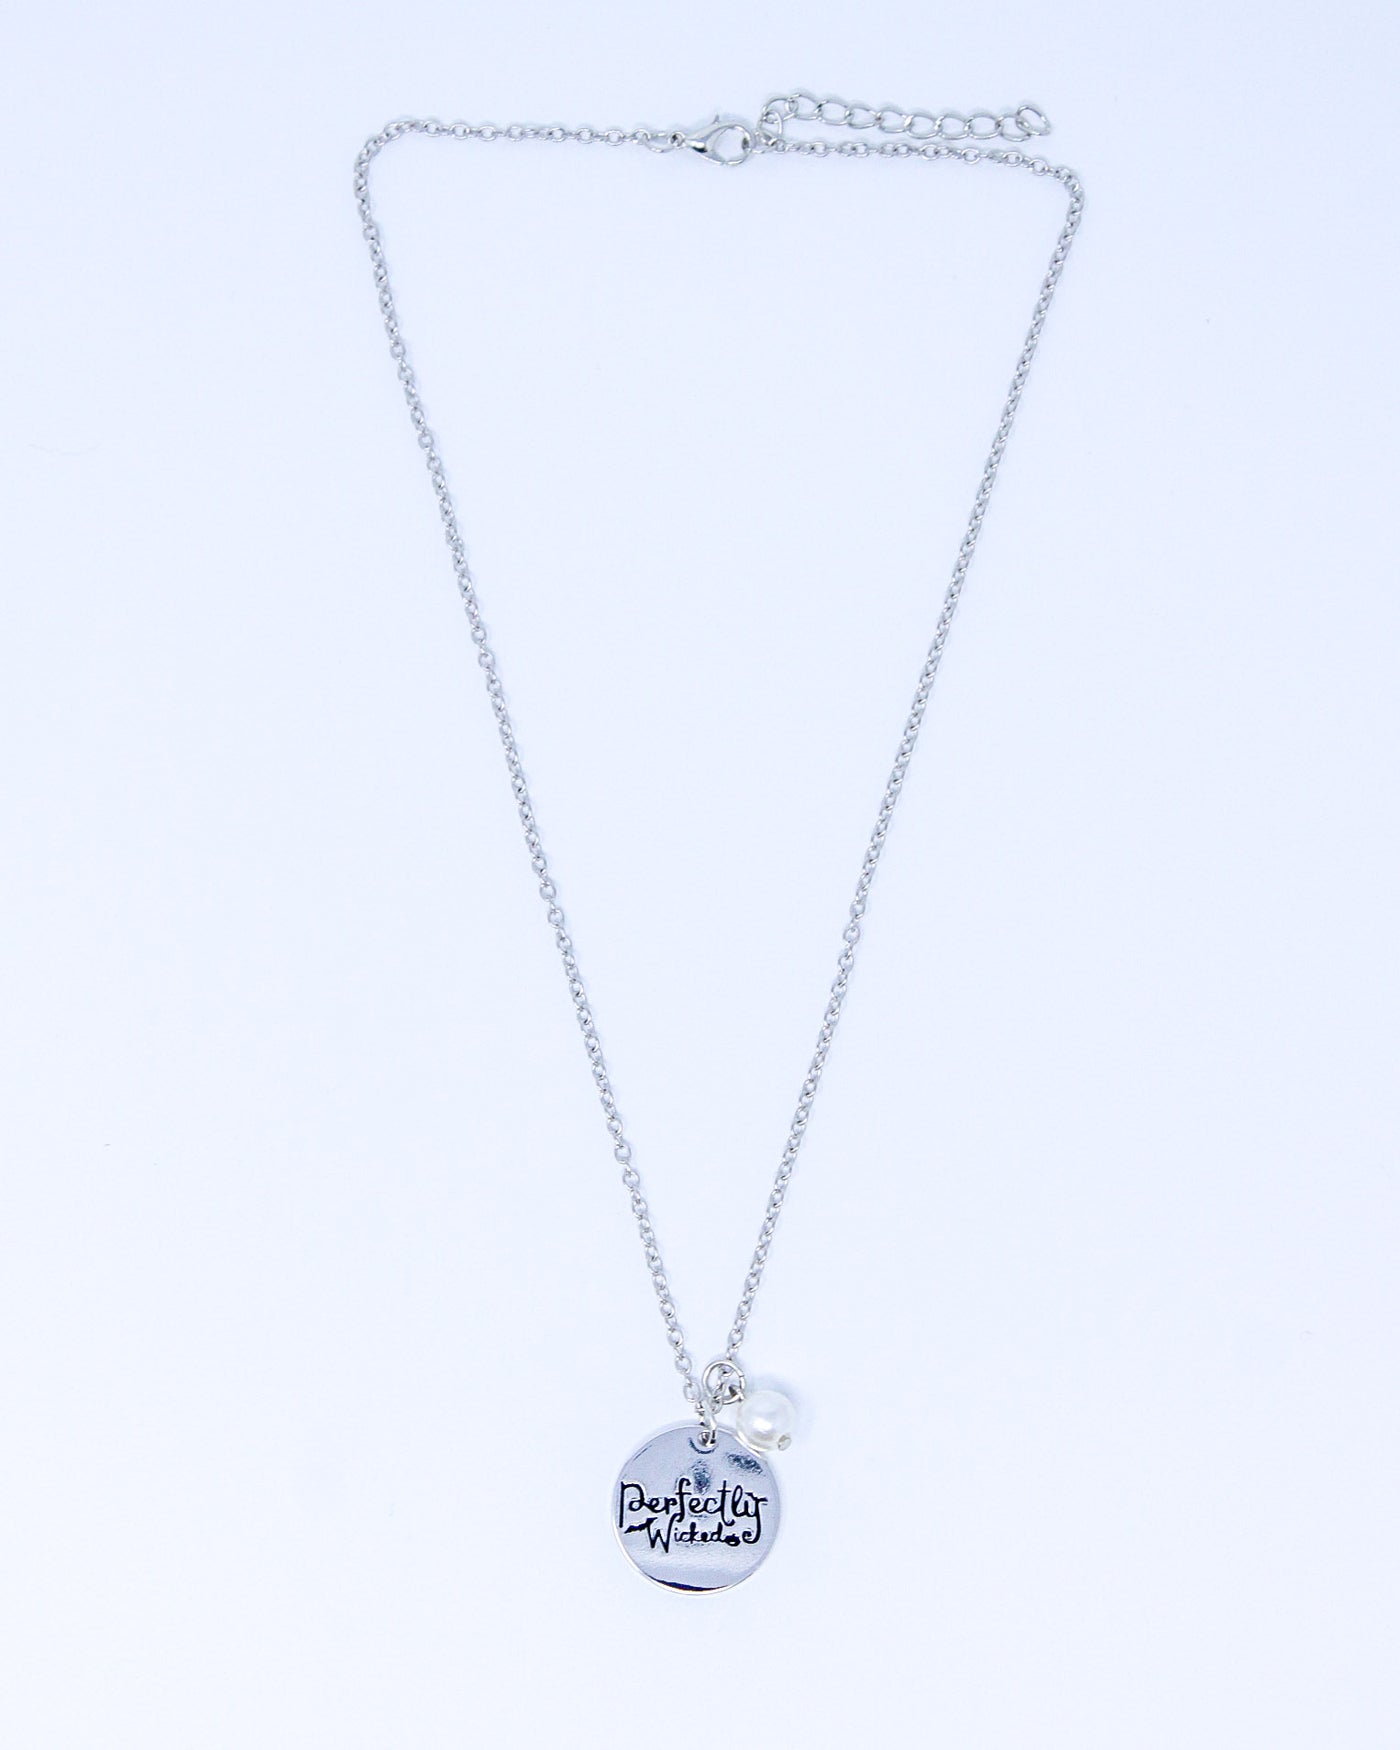 Sayings Necklace - Perfectly Wicked